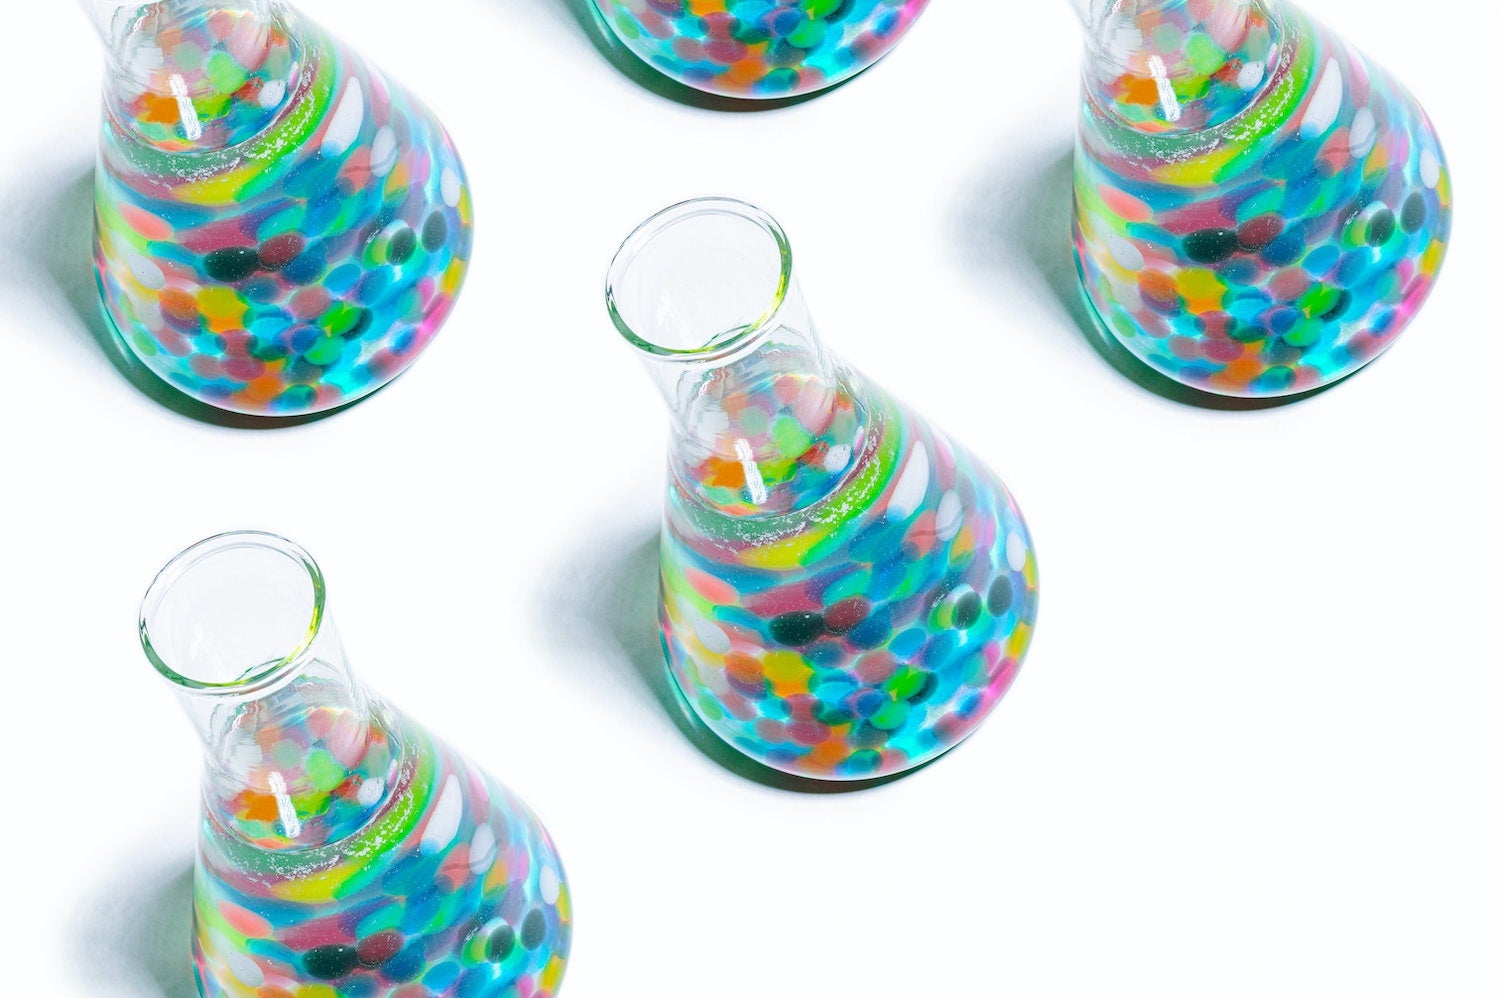 Several large test tubes filled with multi-colored bubbles